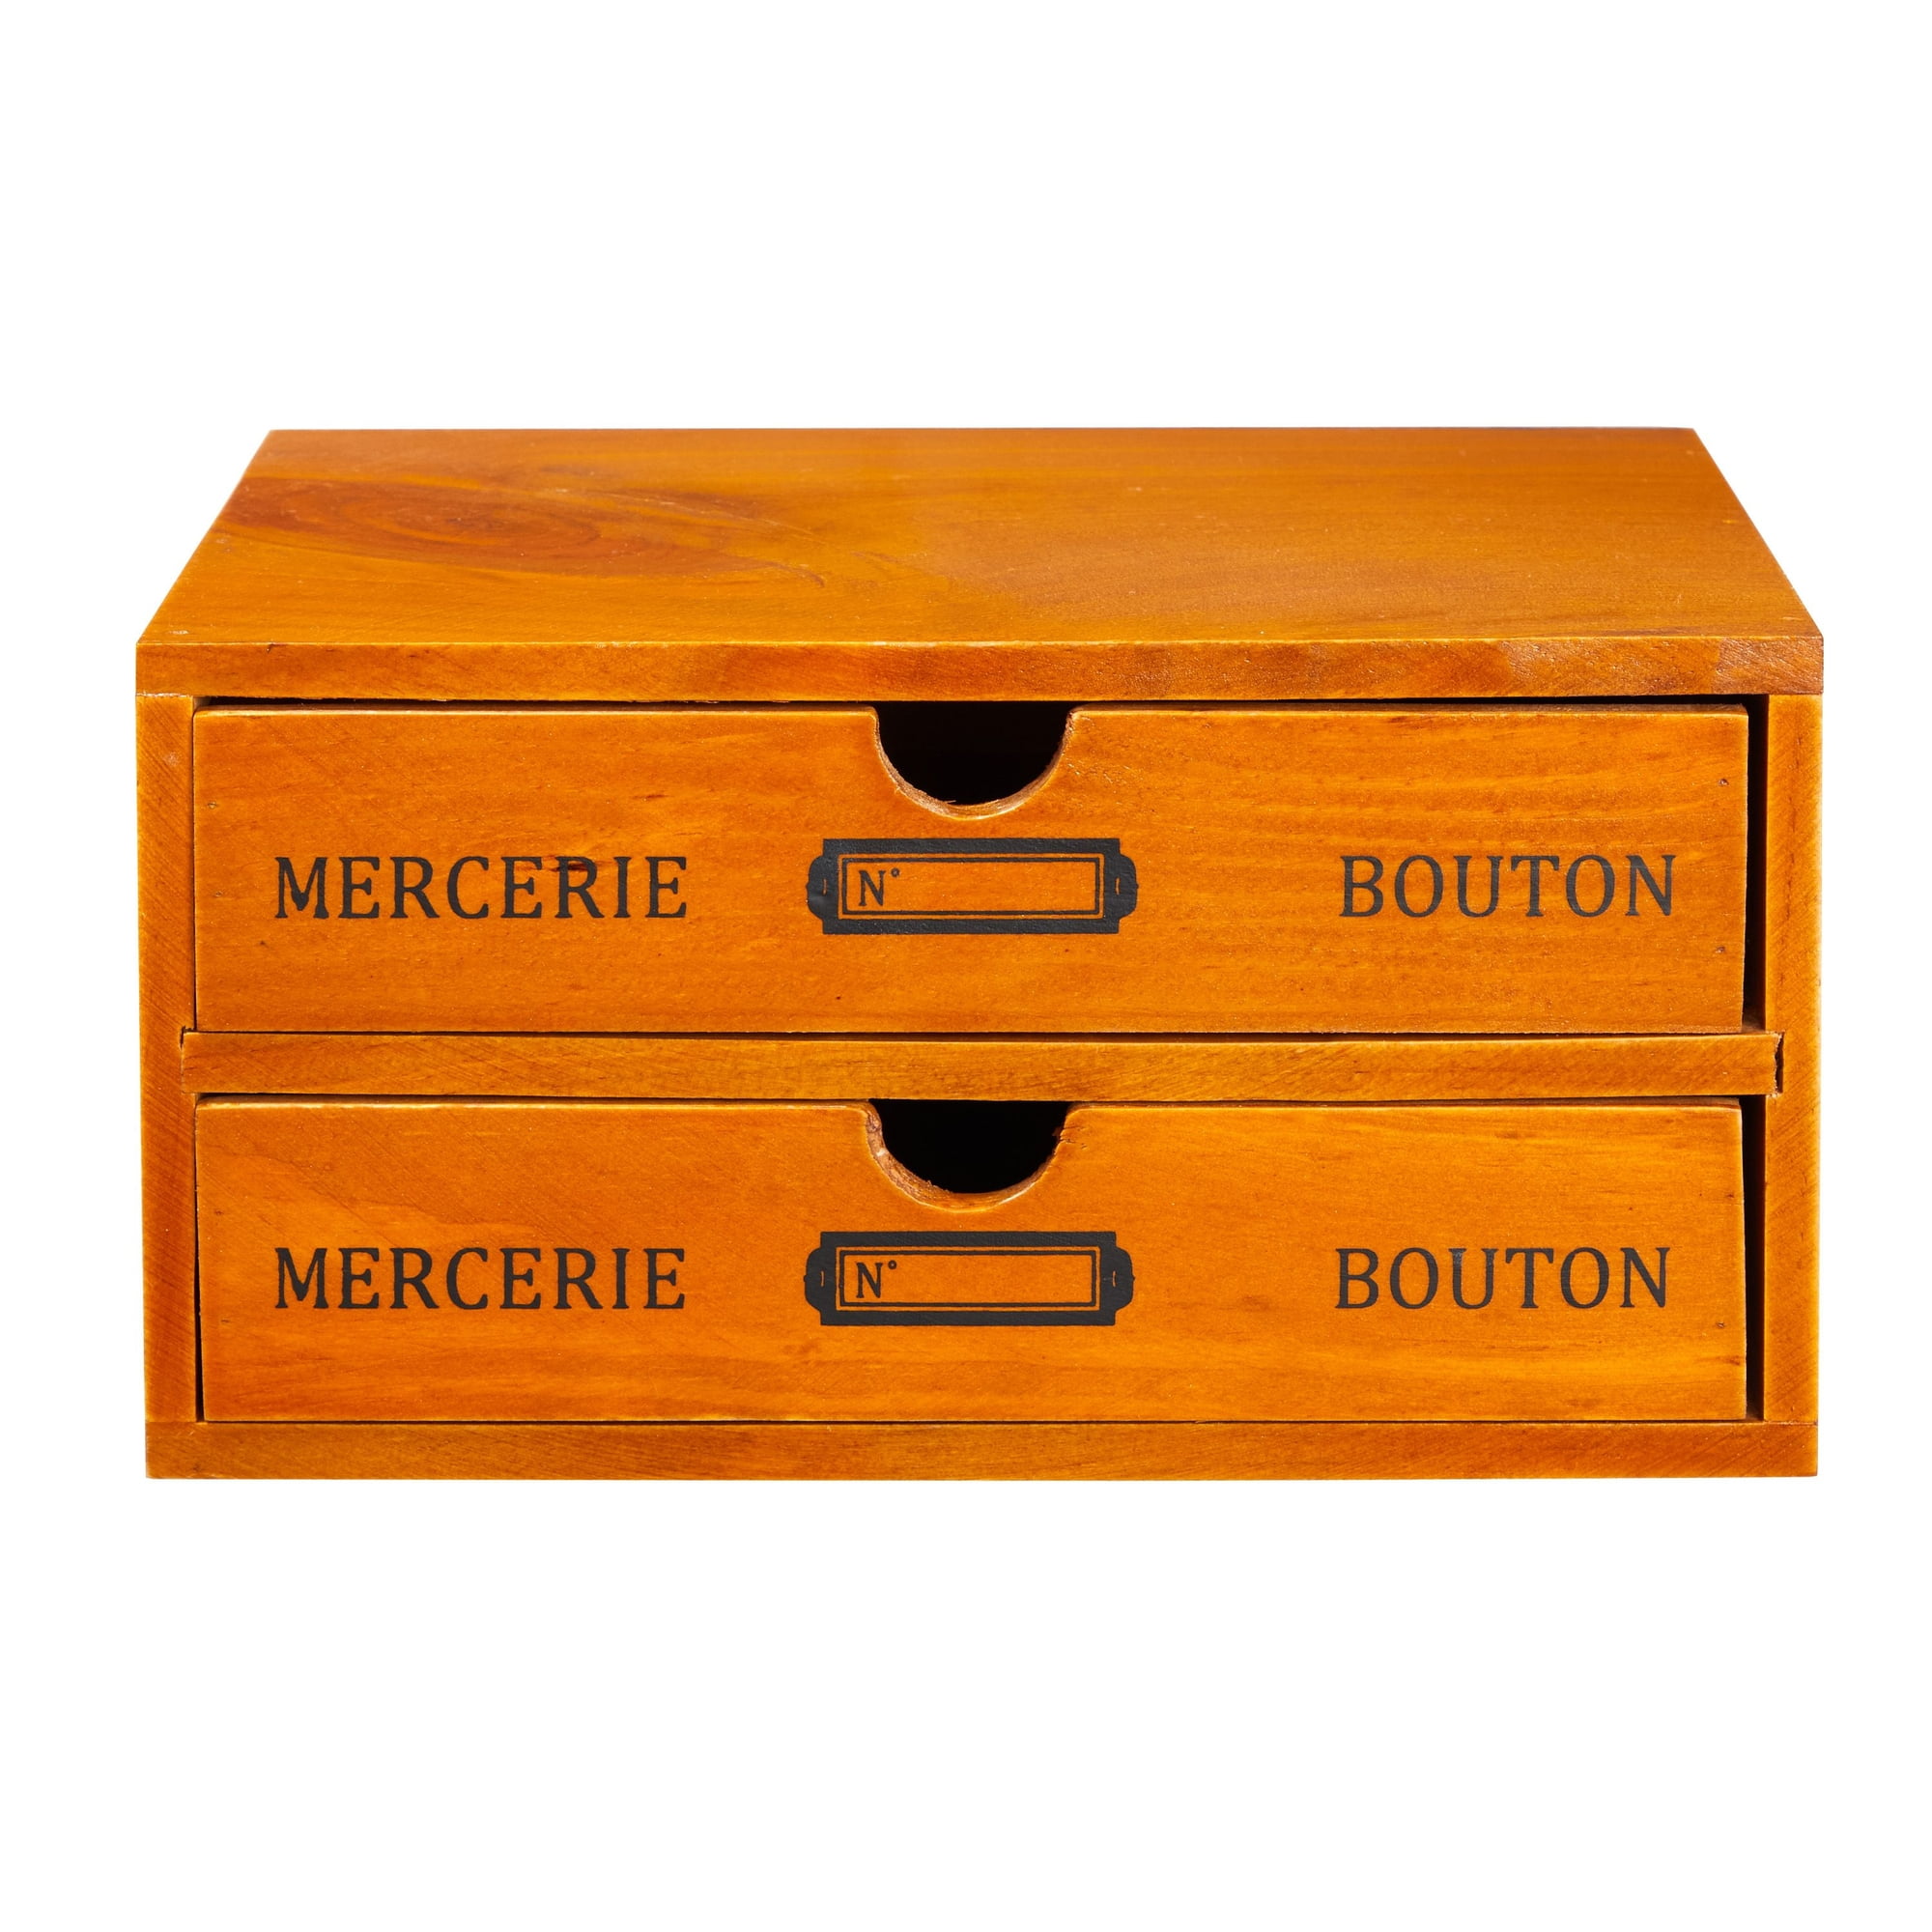 Juvale Organizer Holder Storage Drawers - Decorative Wooden Drawers with Chic French Design - 9.75 x 7 x 5 Inches